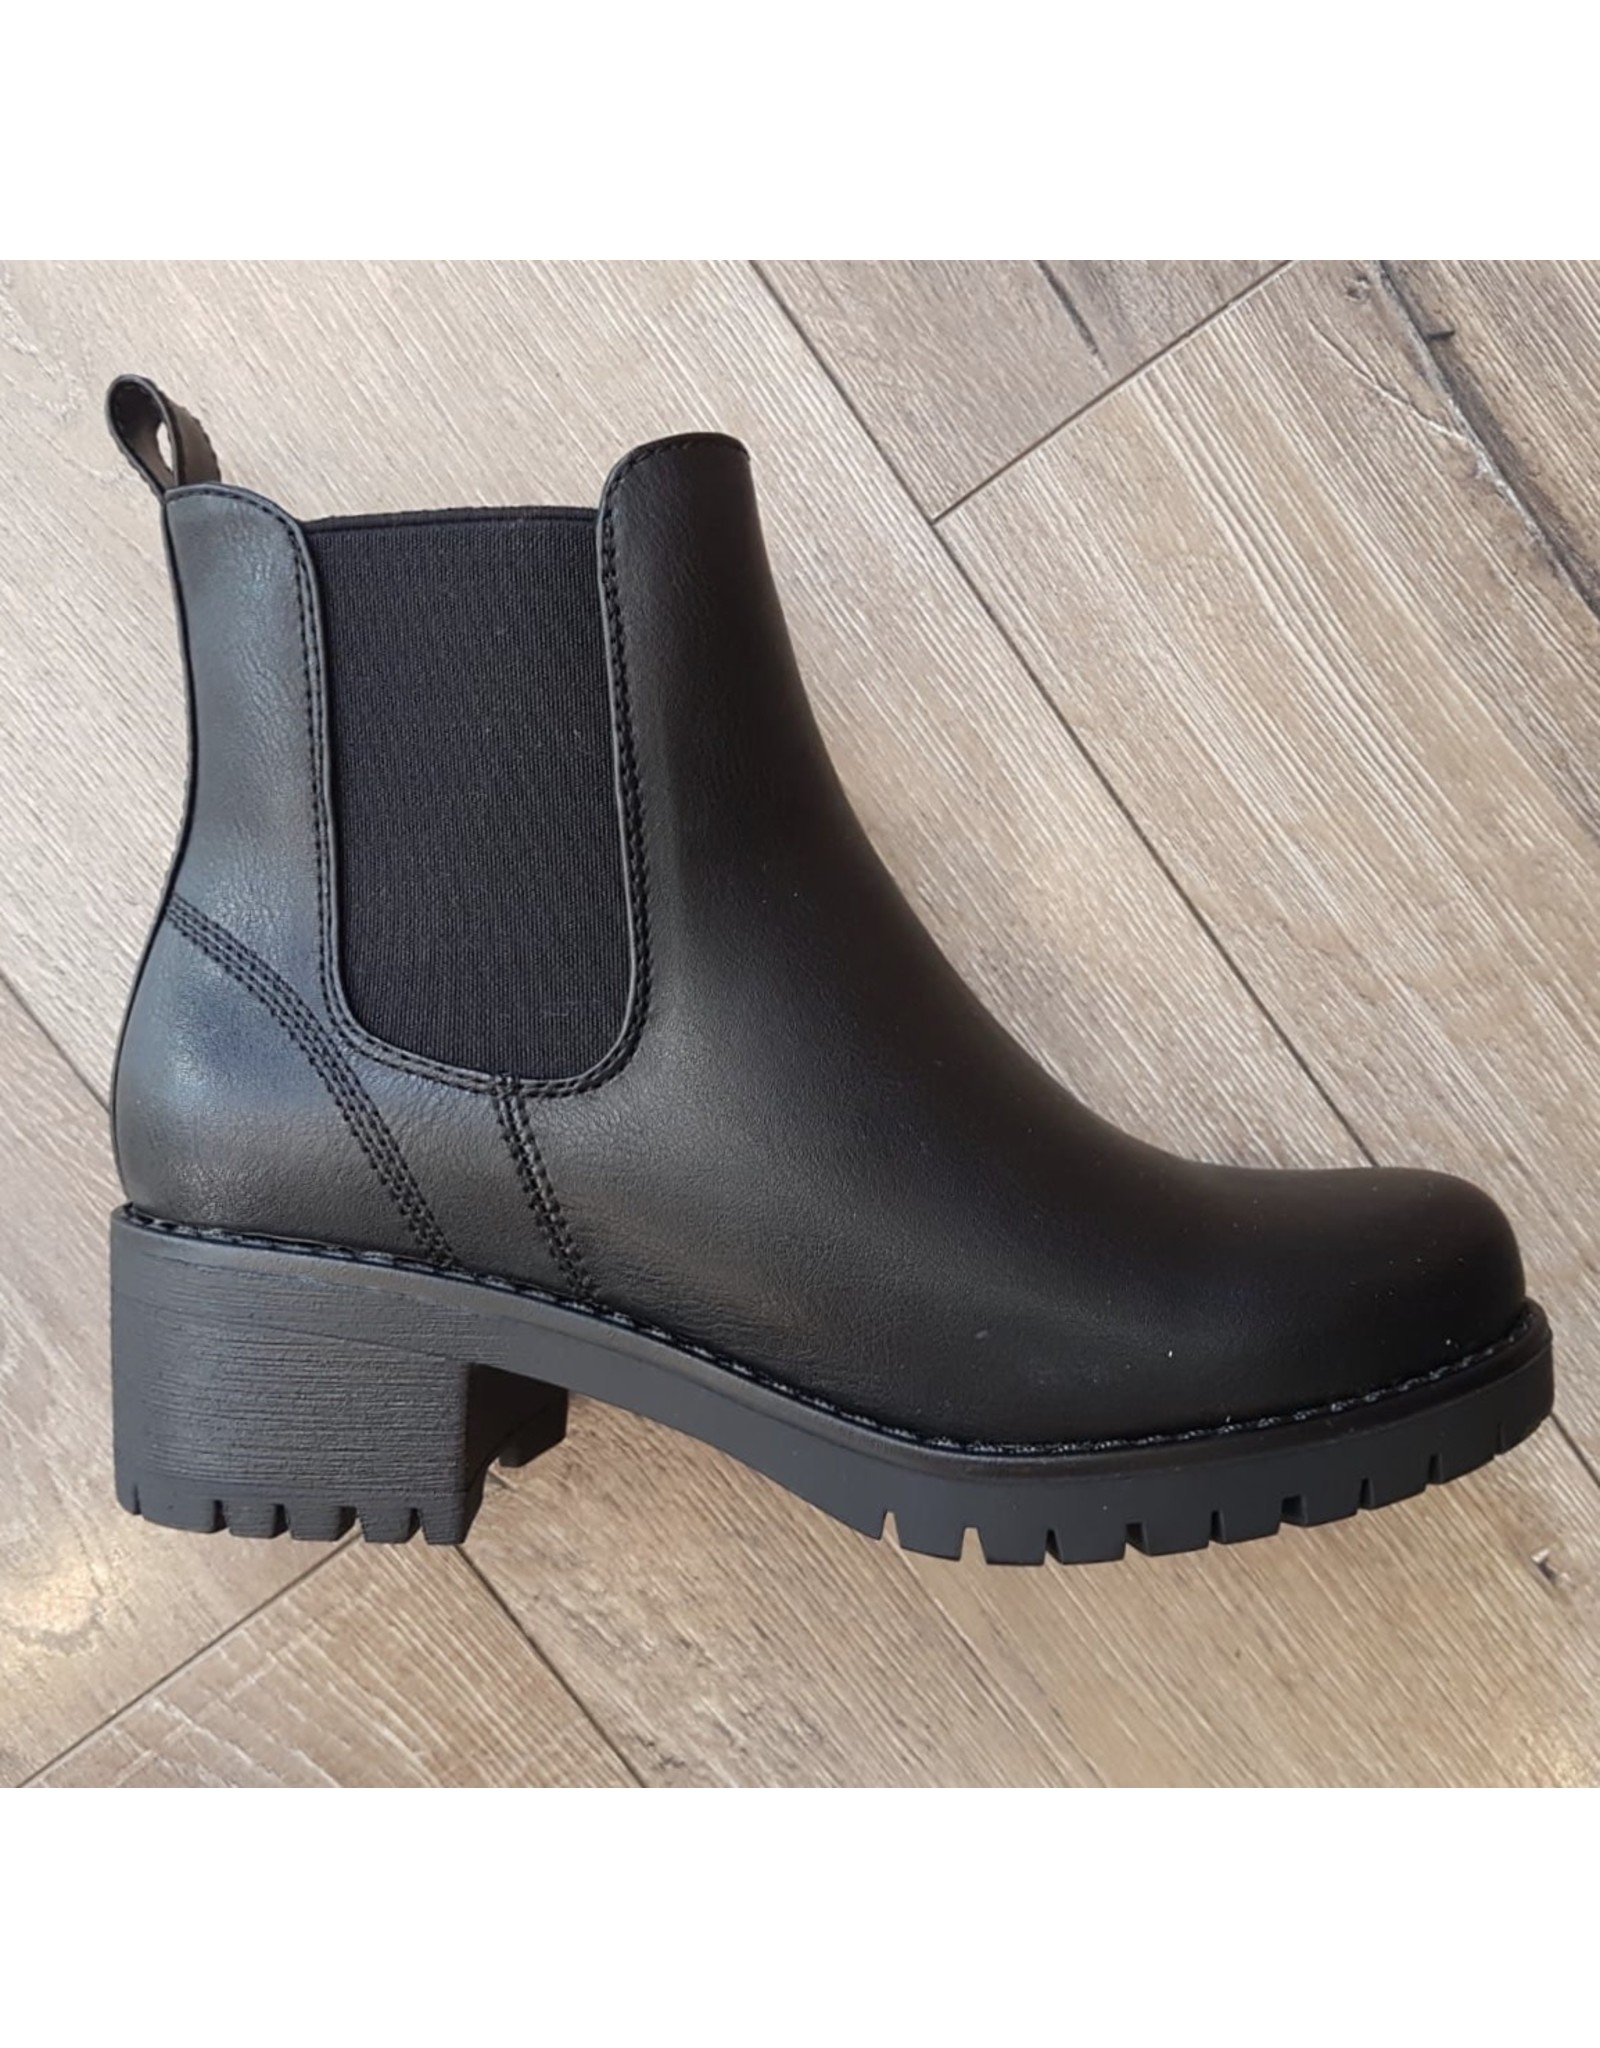 taxi waterproof boots